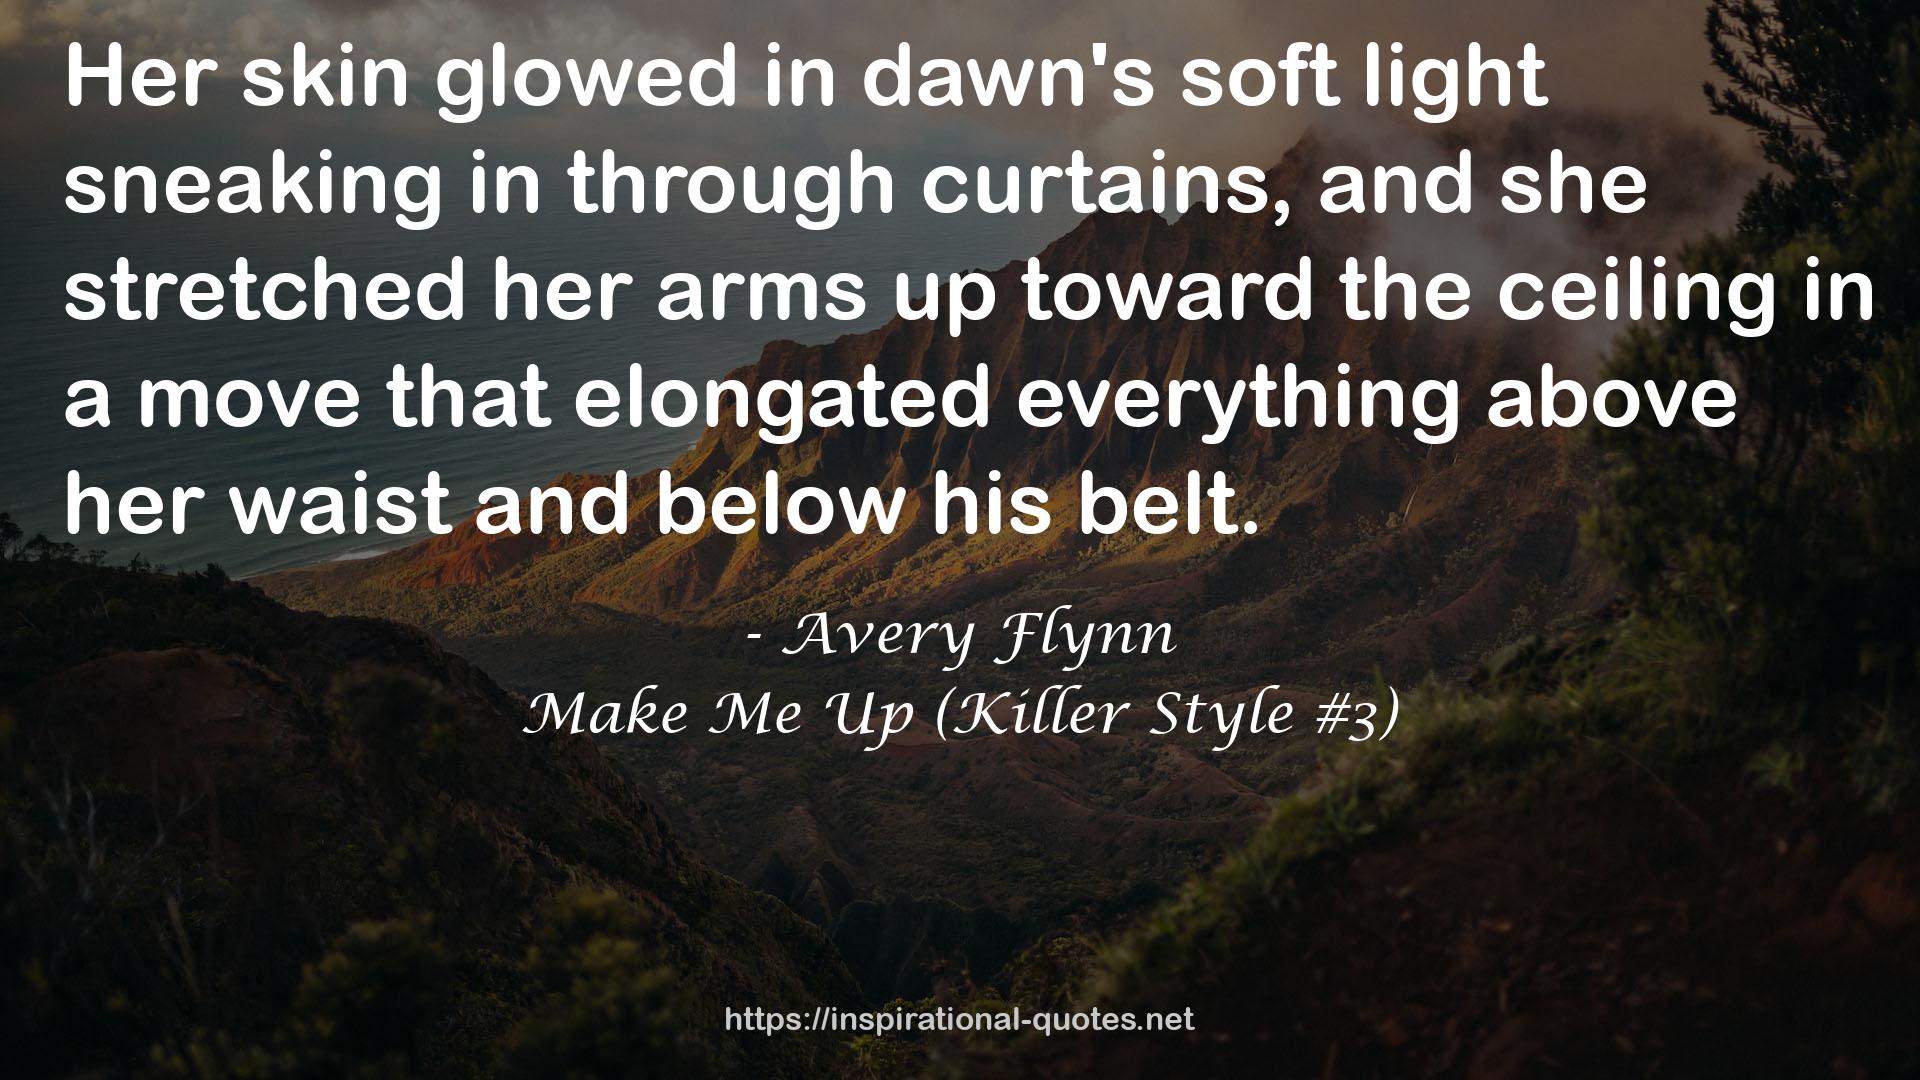 Make Me Up (Killer Style #3) QUOTES